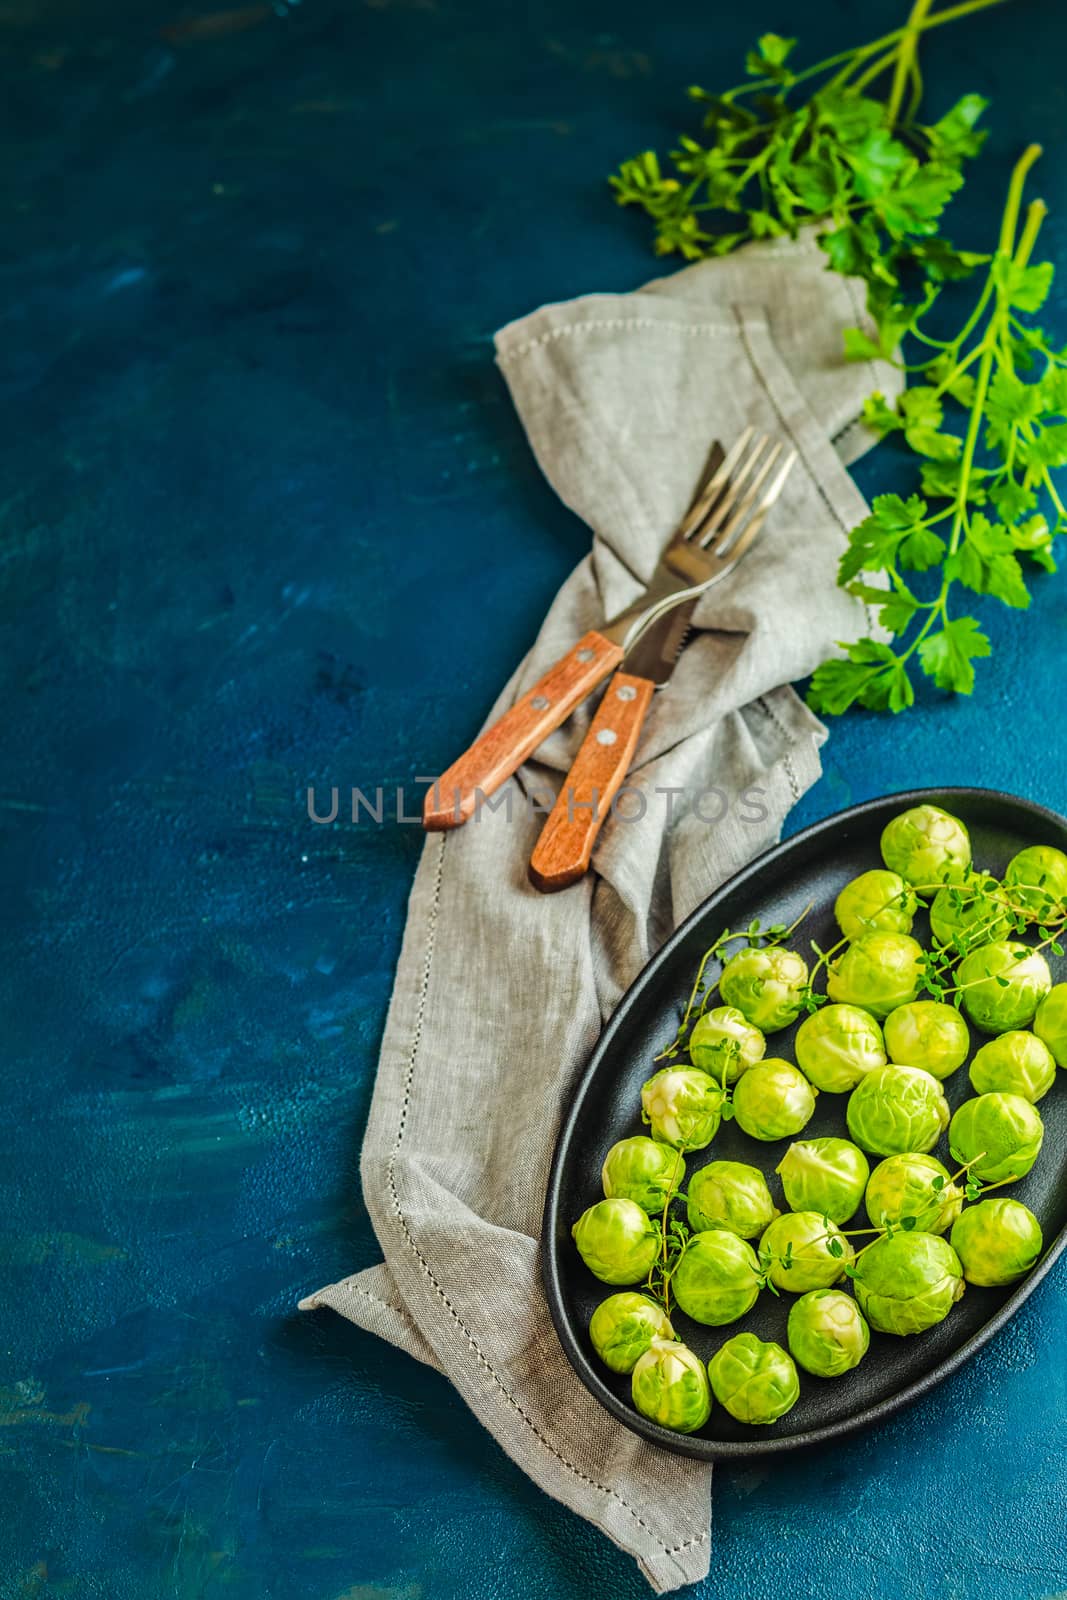 Fresh organic Brussels sprouts in served on black plate, dark bl by ArtSvitlyna